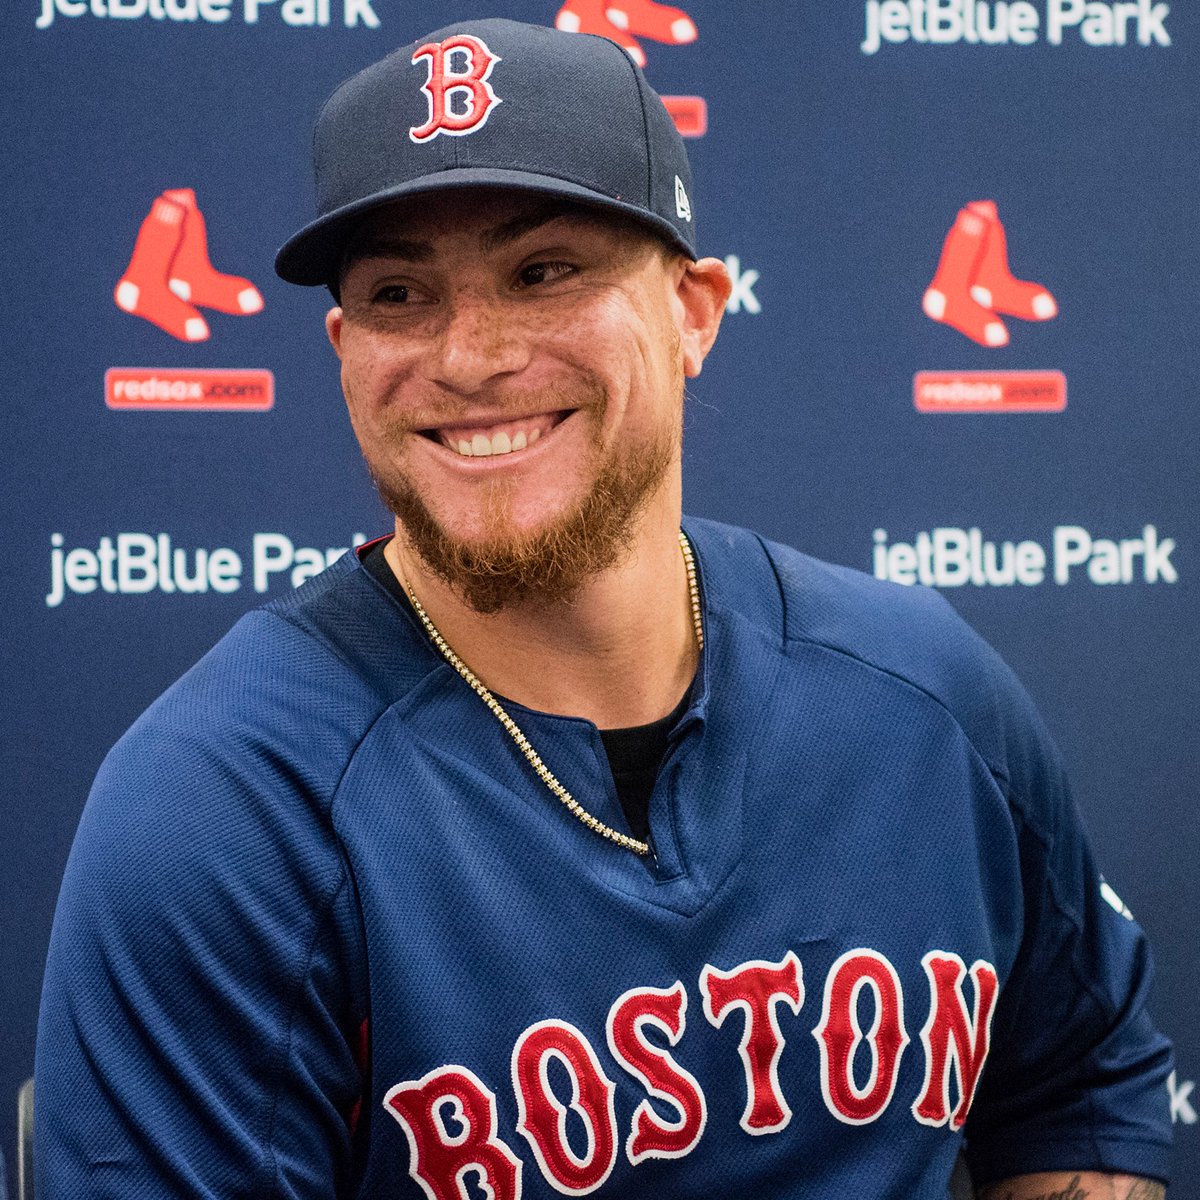 Red Sox on X: “It feels like home.” - Christian Vazquez on the